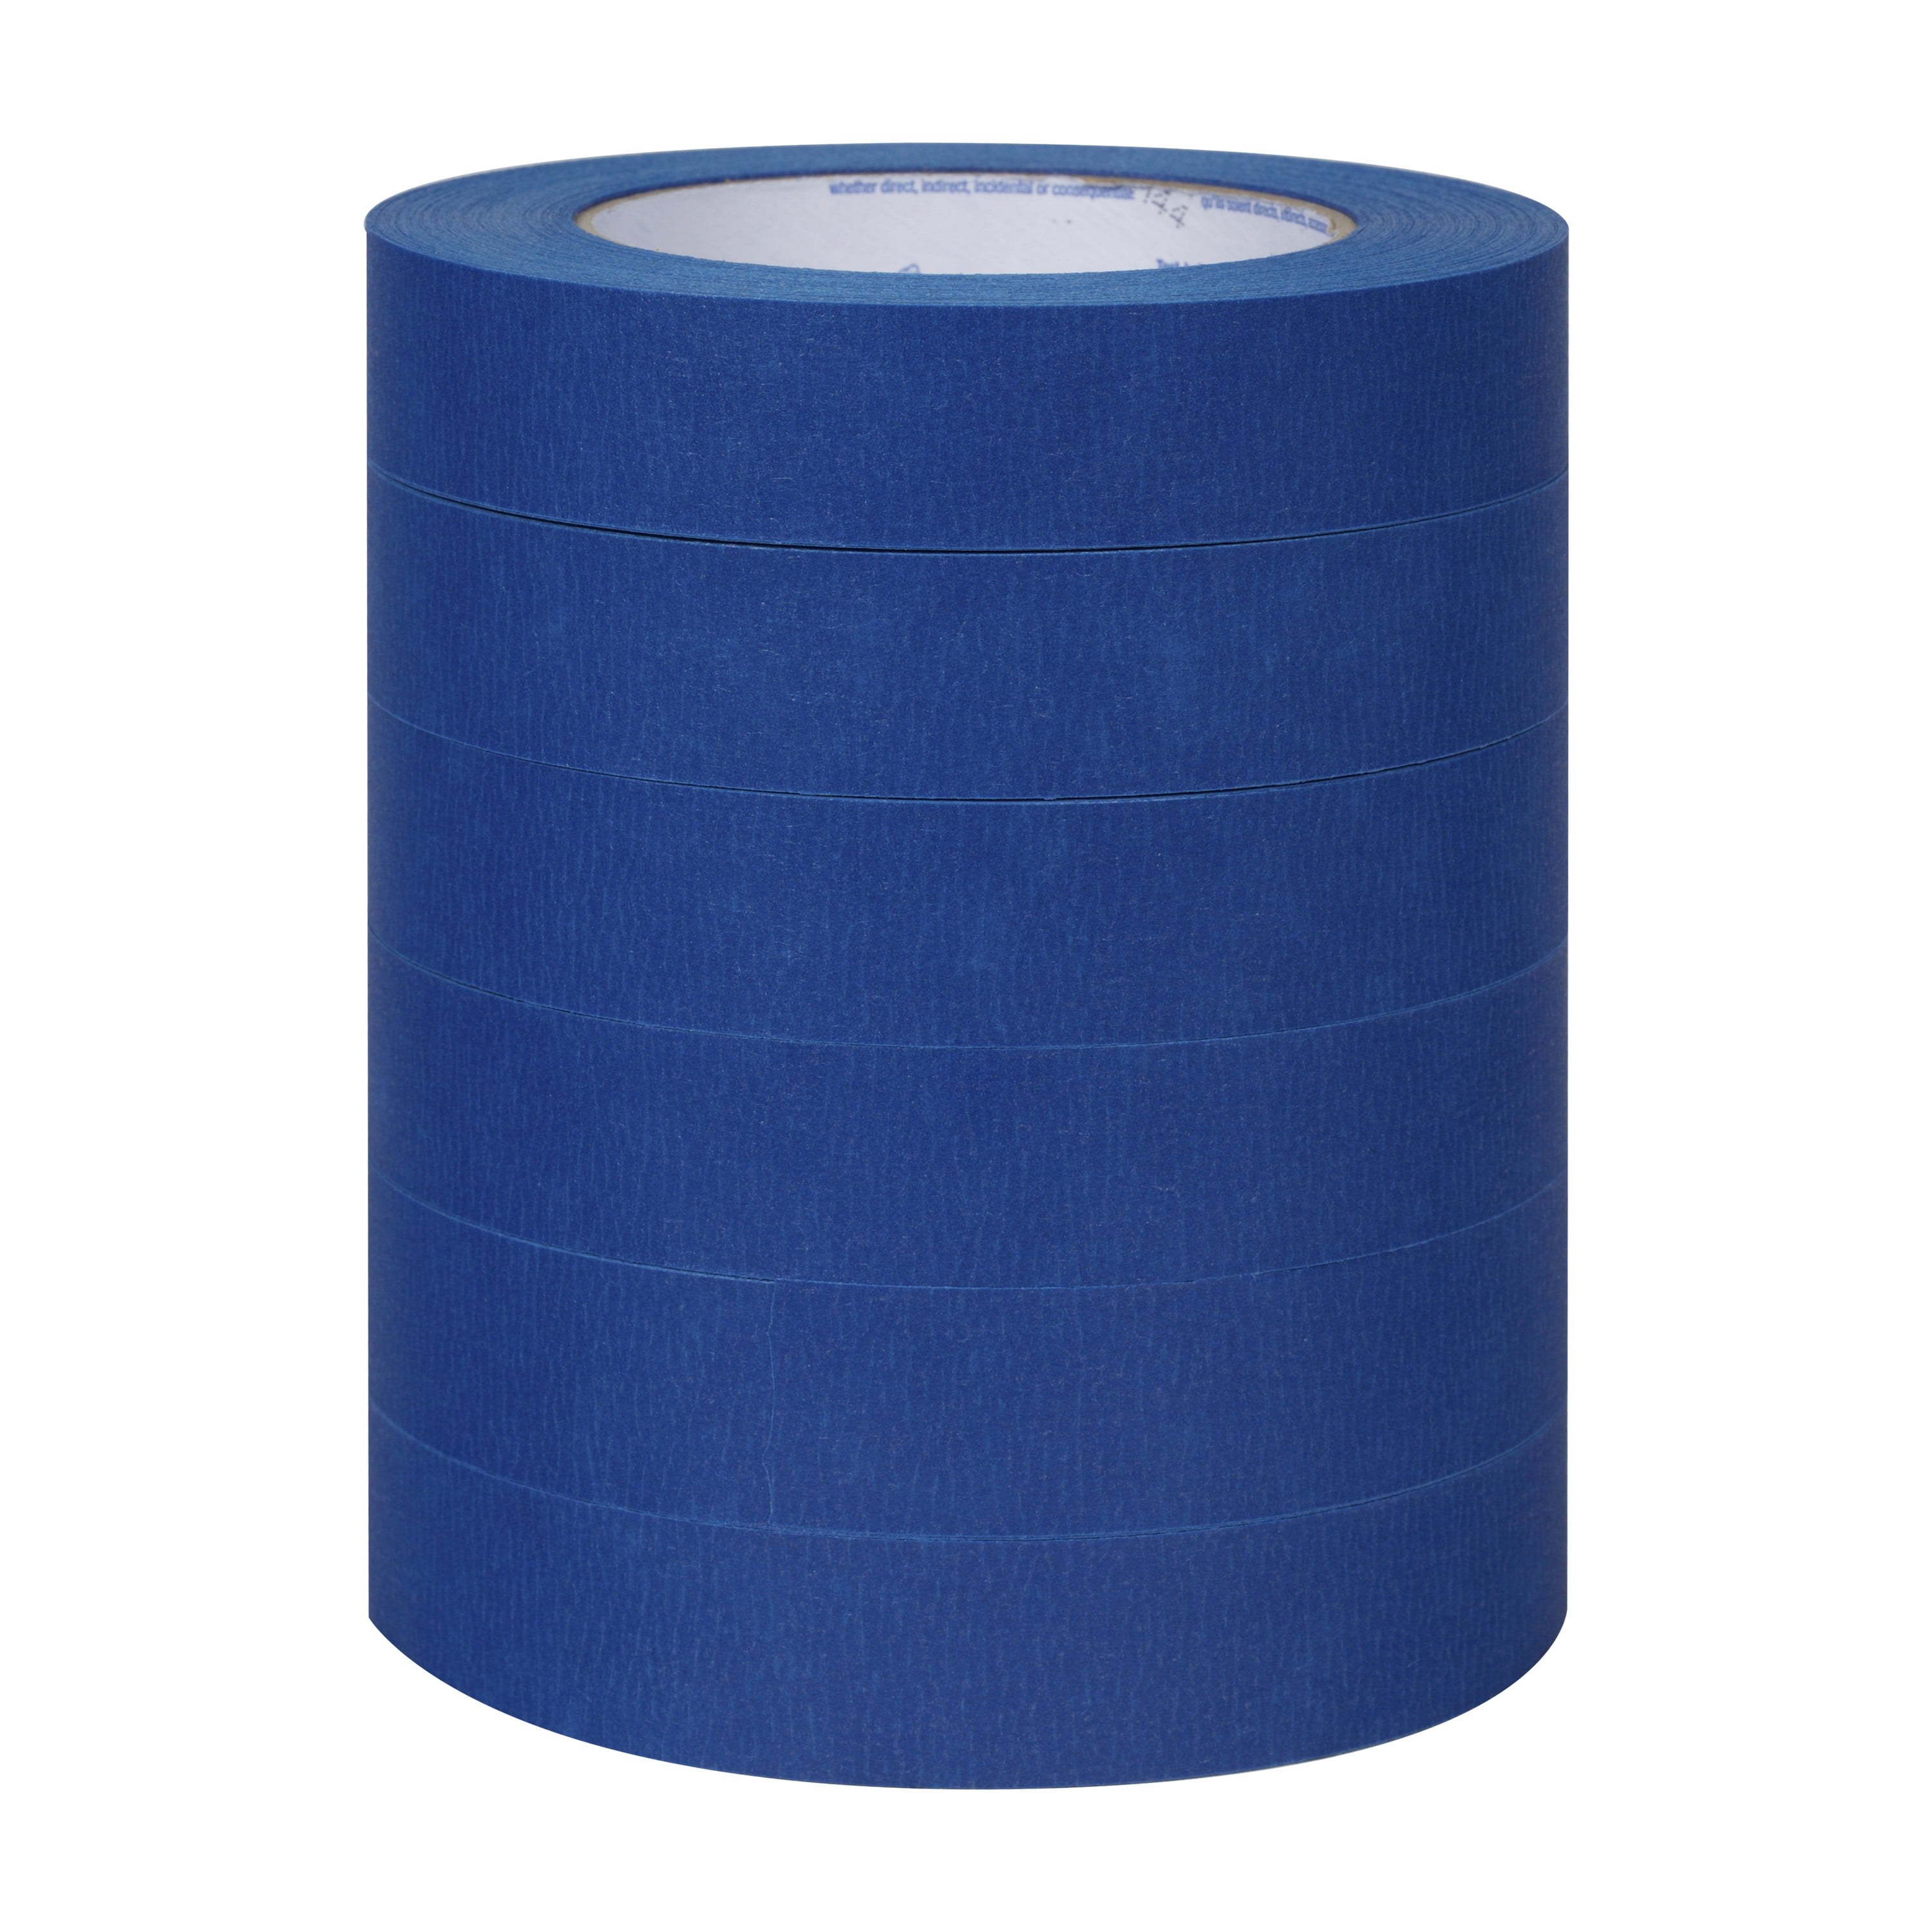 KIWIHUB Blue Painters Tape,1 inch x 60 Yards - Clean Release Masking Tape  for Pa